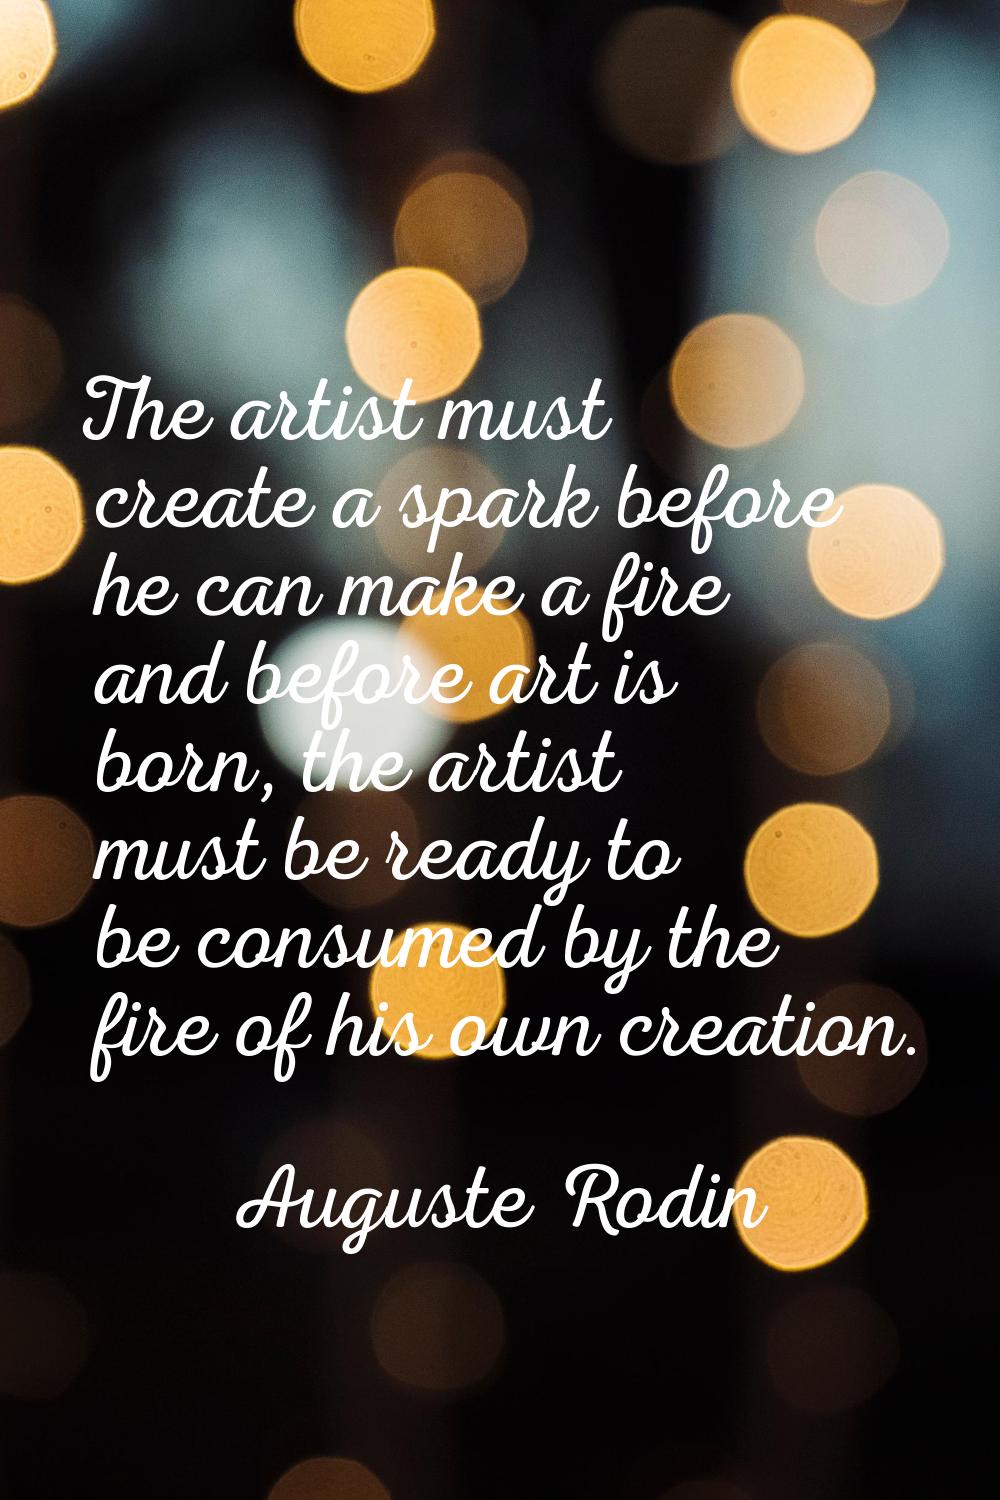 The artist must create a spark before he can make a fire and before art is born, the artist must be